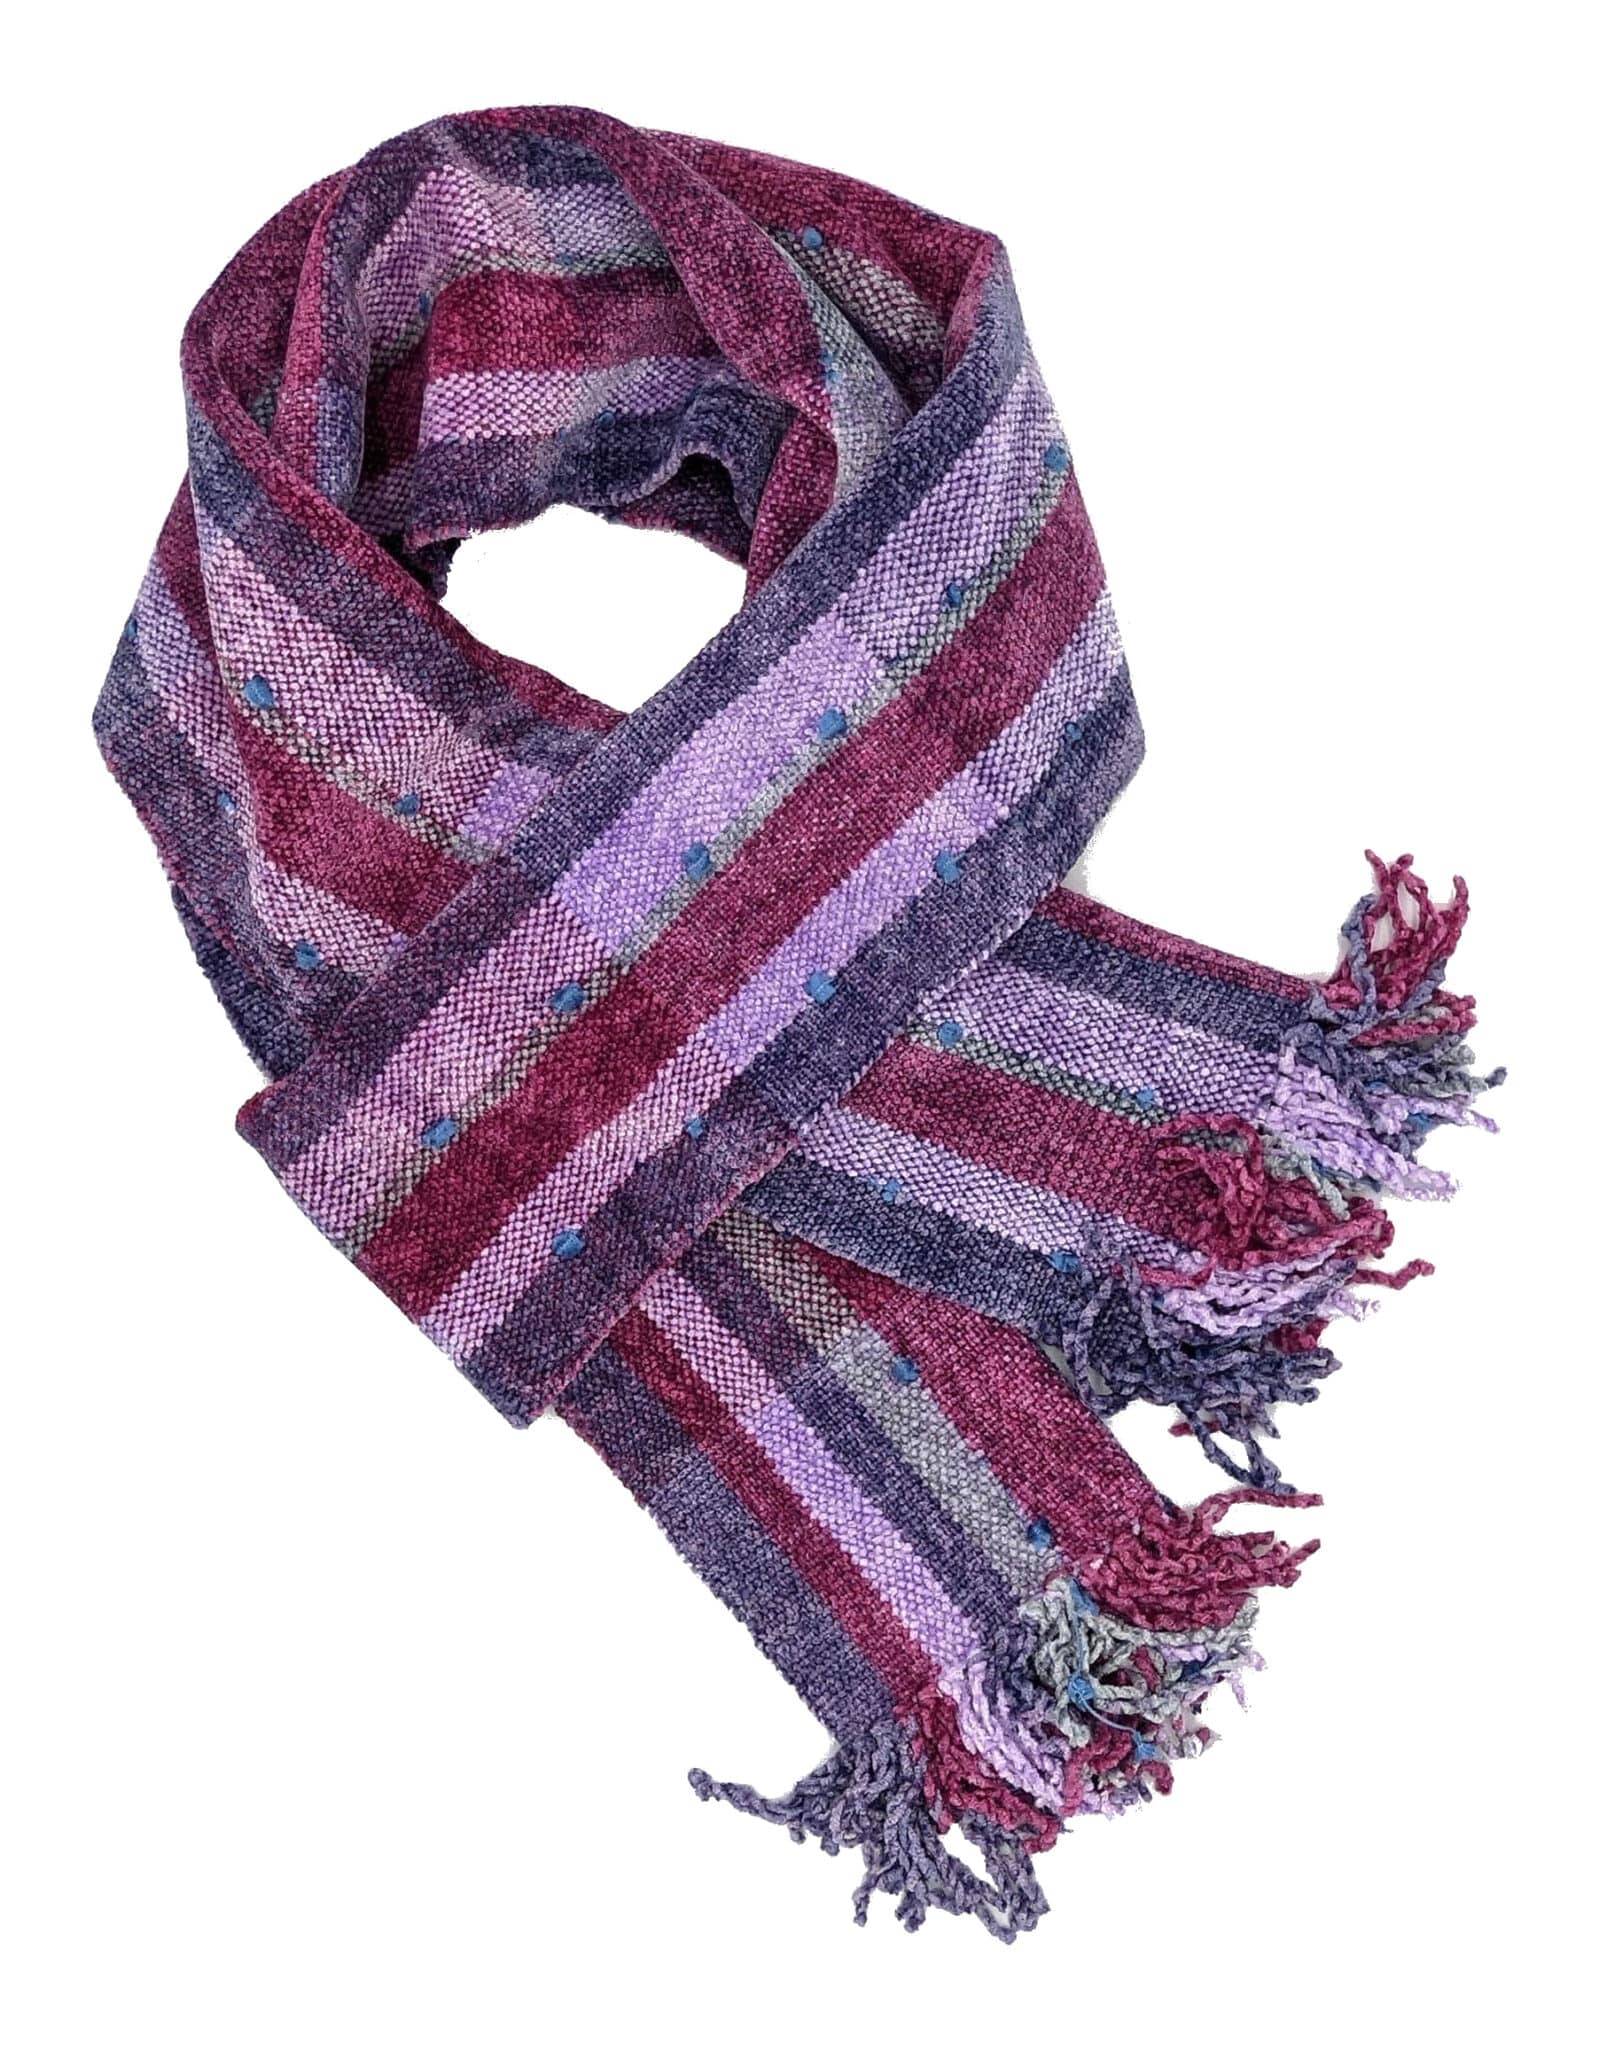 Lilac, Mauve and Purple Stripes with Ornamental Yarn Accents Bamboo Chenille Handwoven Scarf 8 x 68 